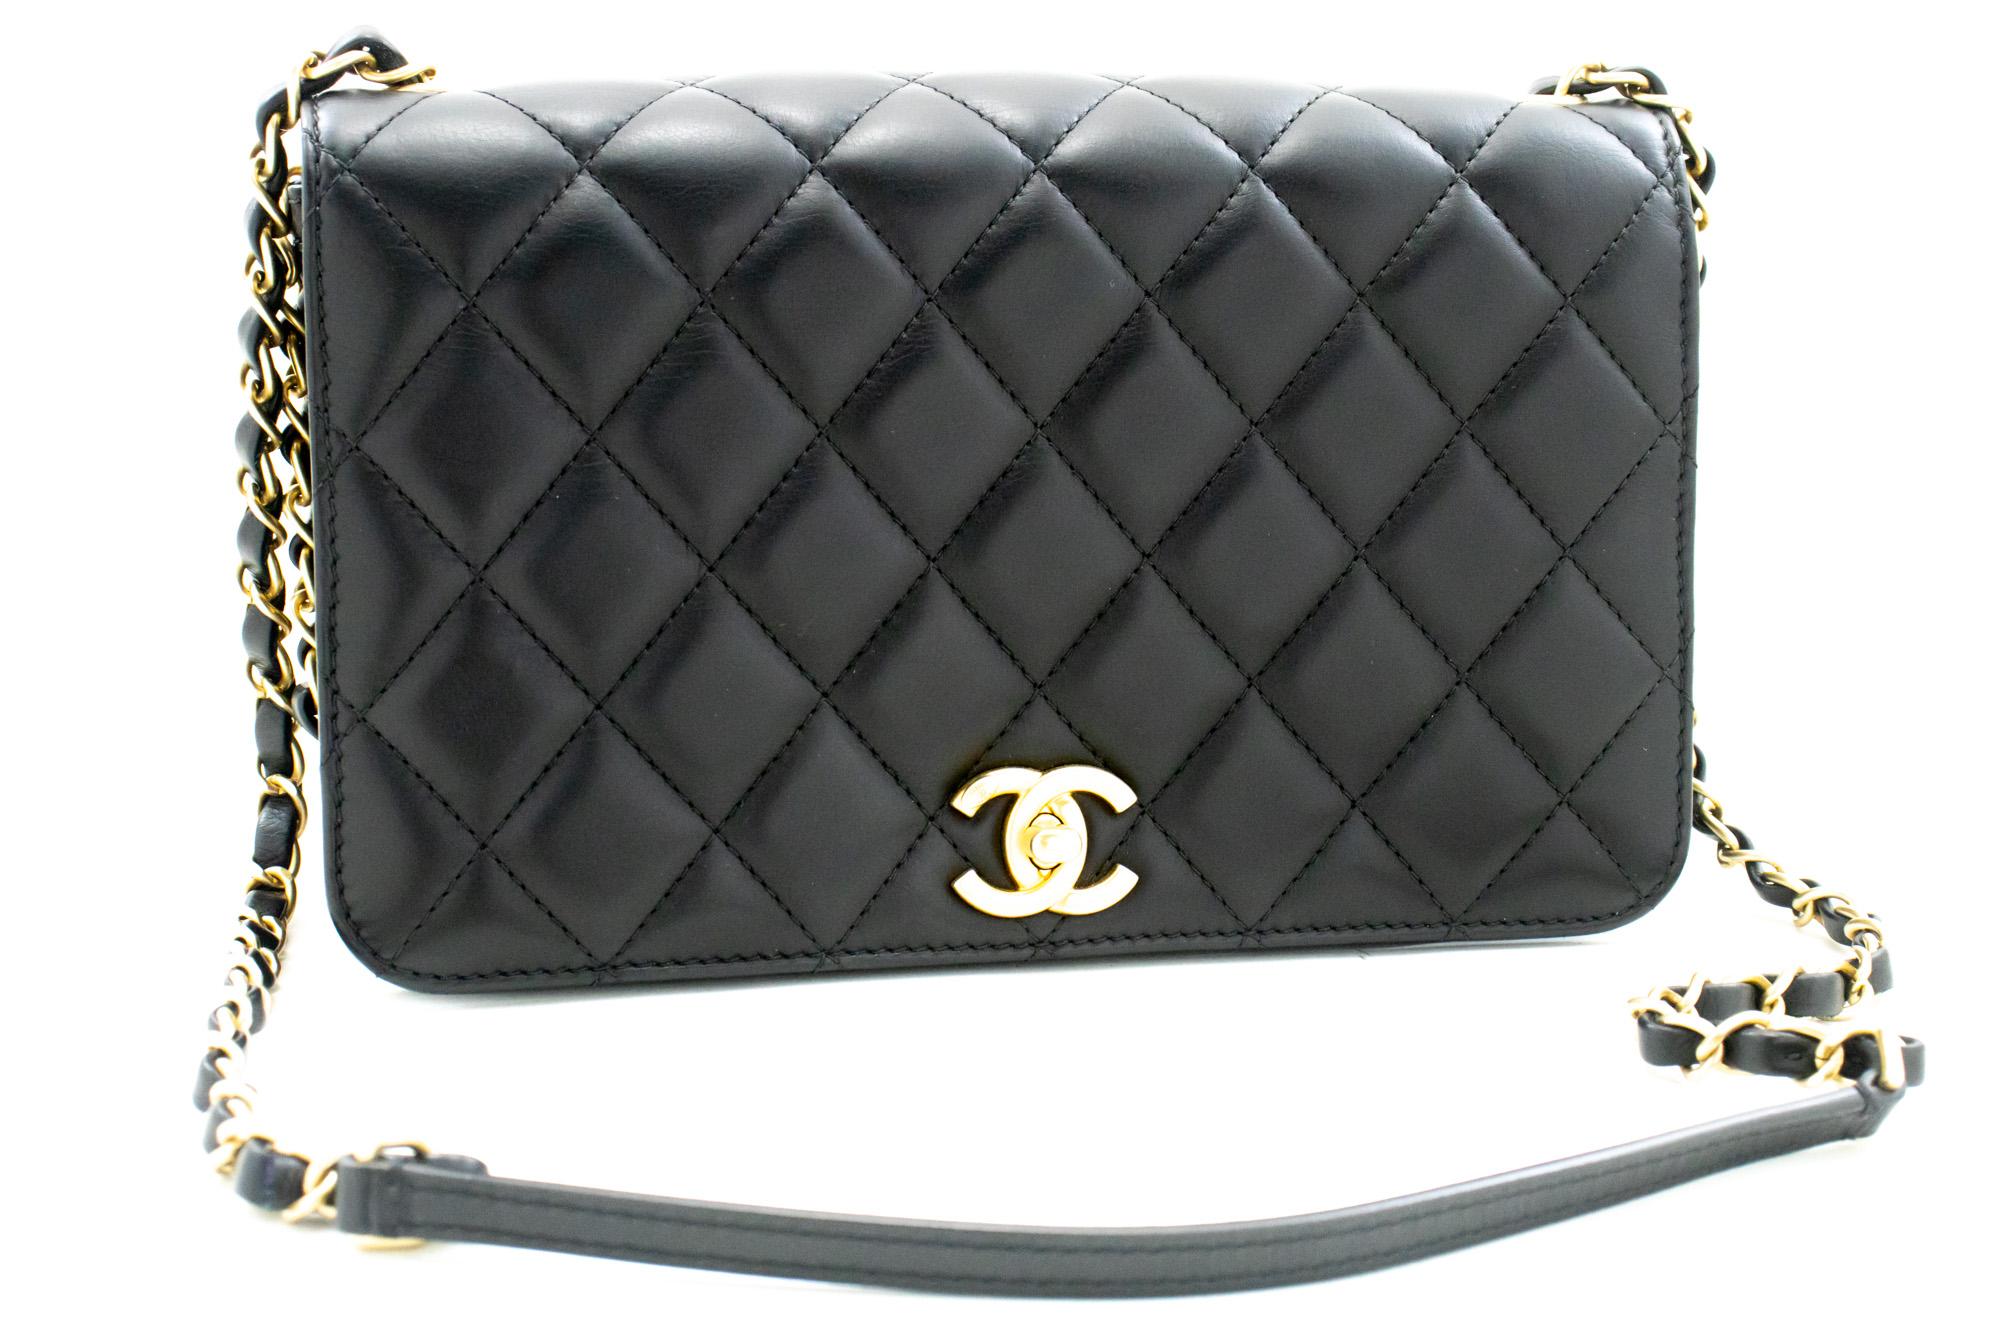 An authentic CHANEL Full Flap Chain Shoulder Bag Black Quilted made of black Lambskin Leather. The color is Black. The outside material is Leather. The pattern is Solid. This item is Contemporary. The year of manufacture would be 2017.
Conditions &